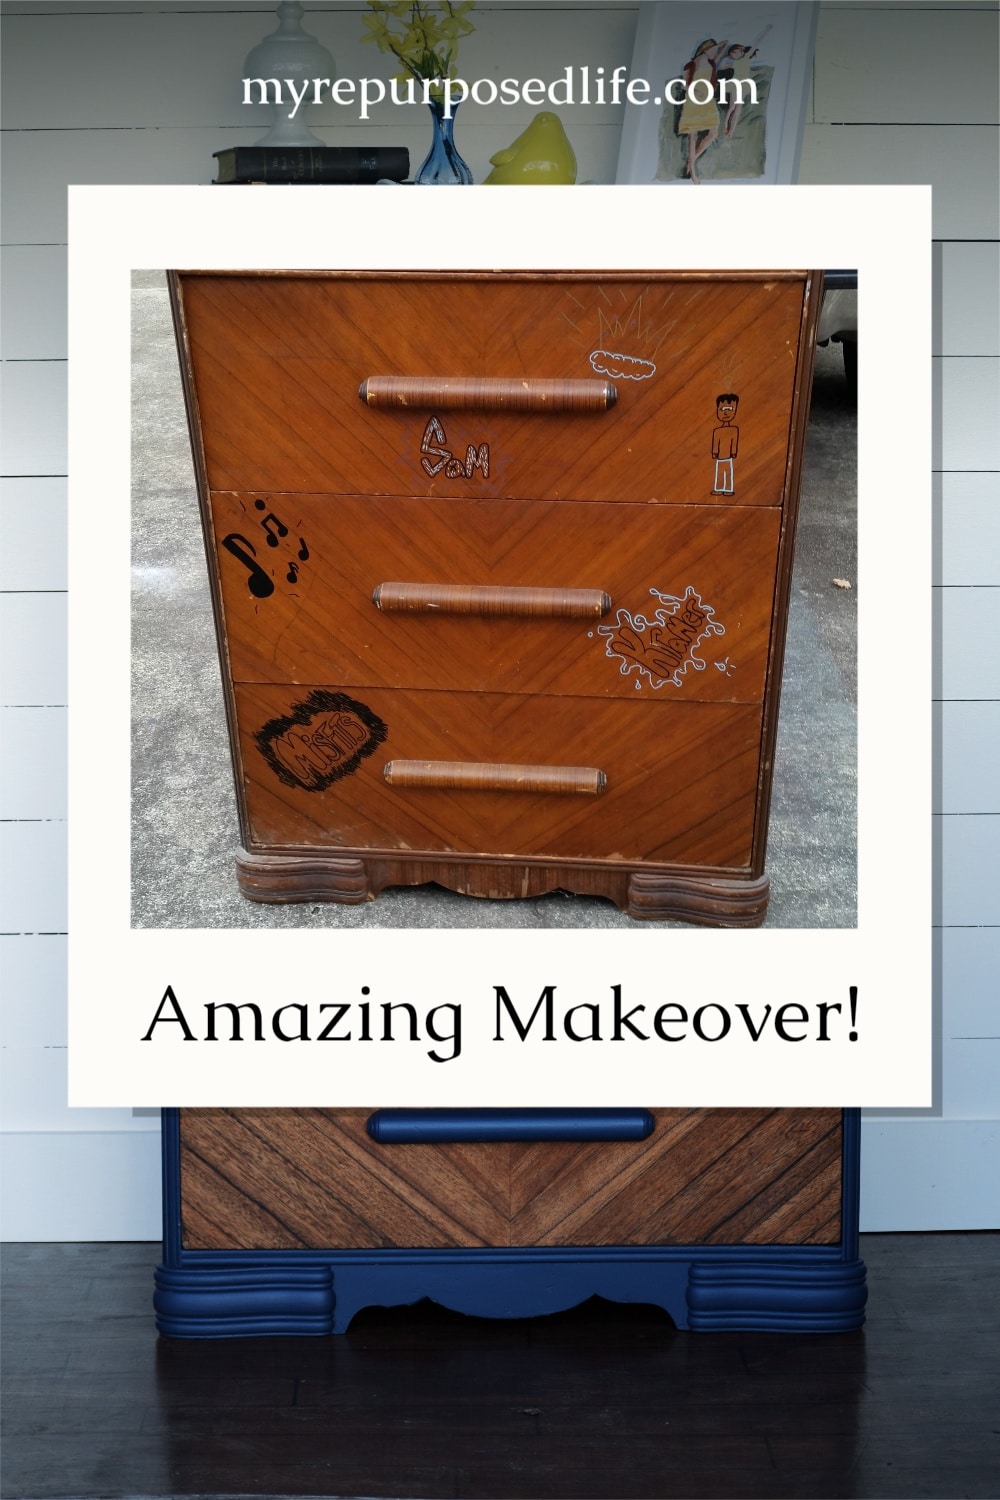 This amazing makeover of a waterfall chest of drawers will have you wondering why you threw that piece out. Abused furniture can be beautifully saved! #MyRepurposedLife #repurposed #furniture #waterfall #dresser #chestofdrawers #diy Makeover via @repurposedlife